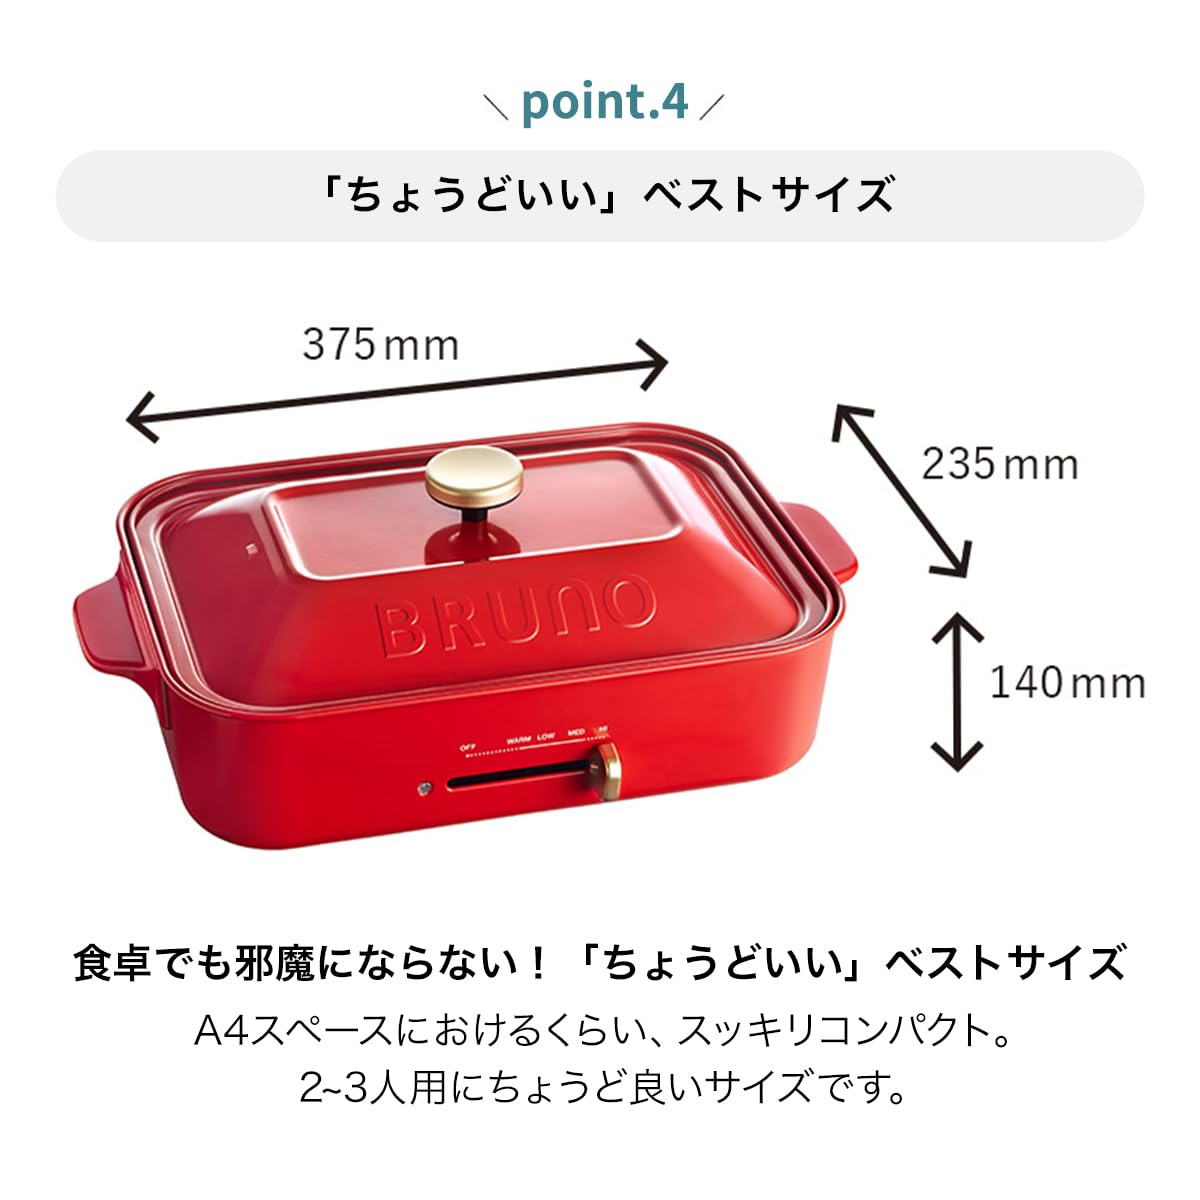 BRUNO BOE021-NV Compact Hot Plate, Main Body, 2 Types (Takoyaki, Flat), Navy, Highly Recommended, Stylish, Cute, Includes Lid and Lid, 1,200 W, Temperature Adjustable, Easy to Clean, For 1 or 2 People, Small, Small Size, For Small People, For Small People